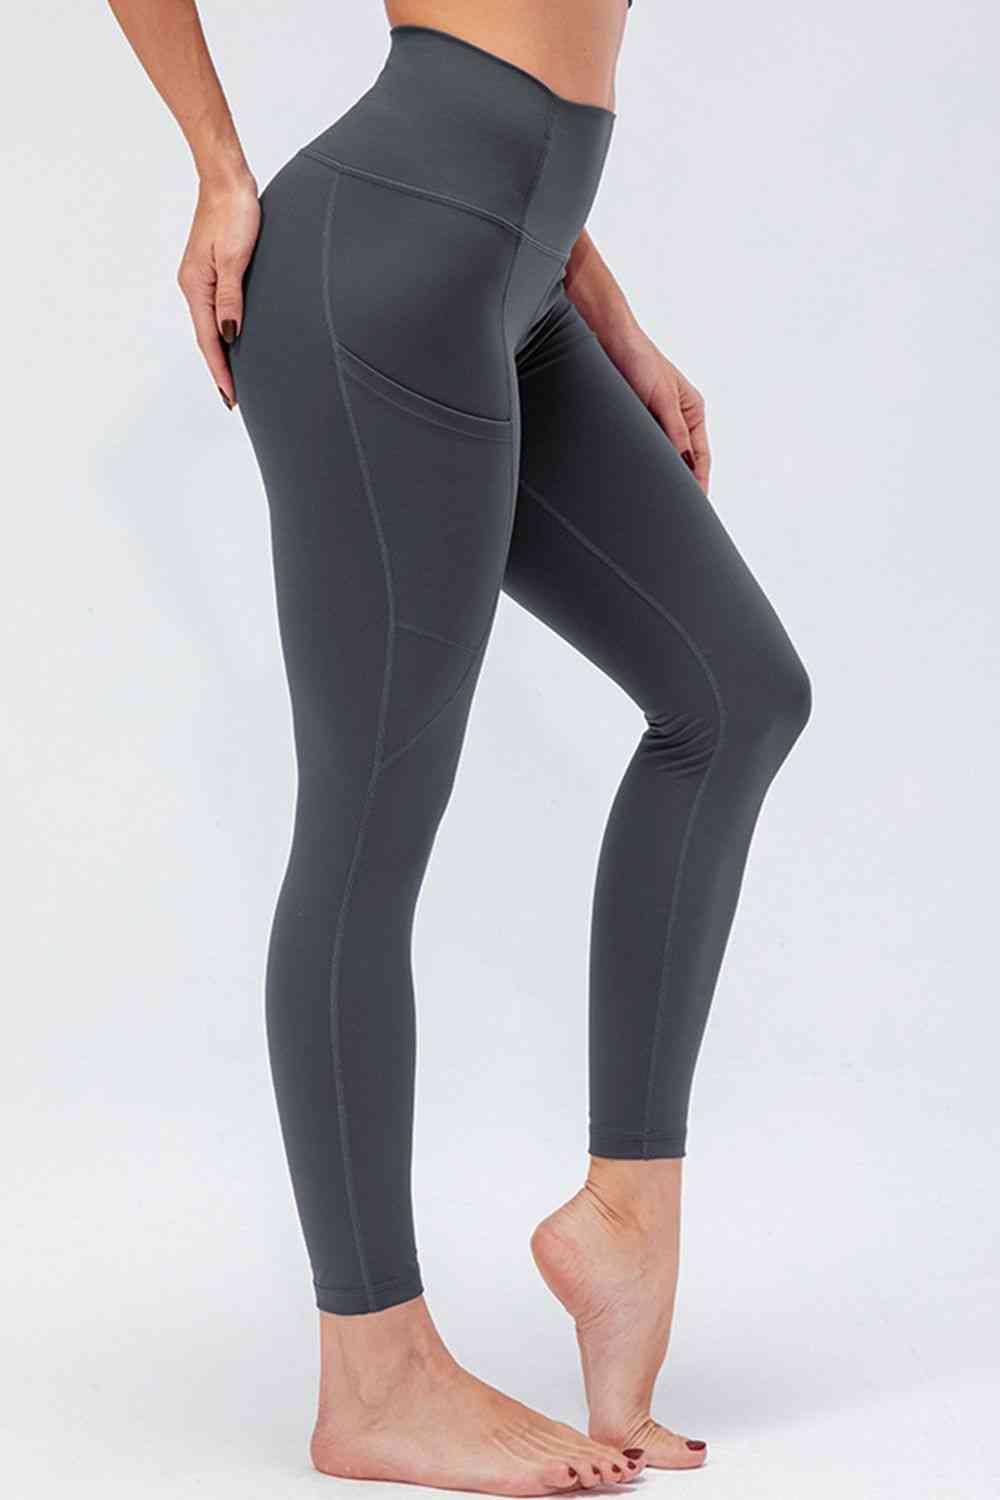 Tropic Pacific Breathable Wide Waistband Active Leggings with Pockets